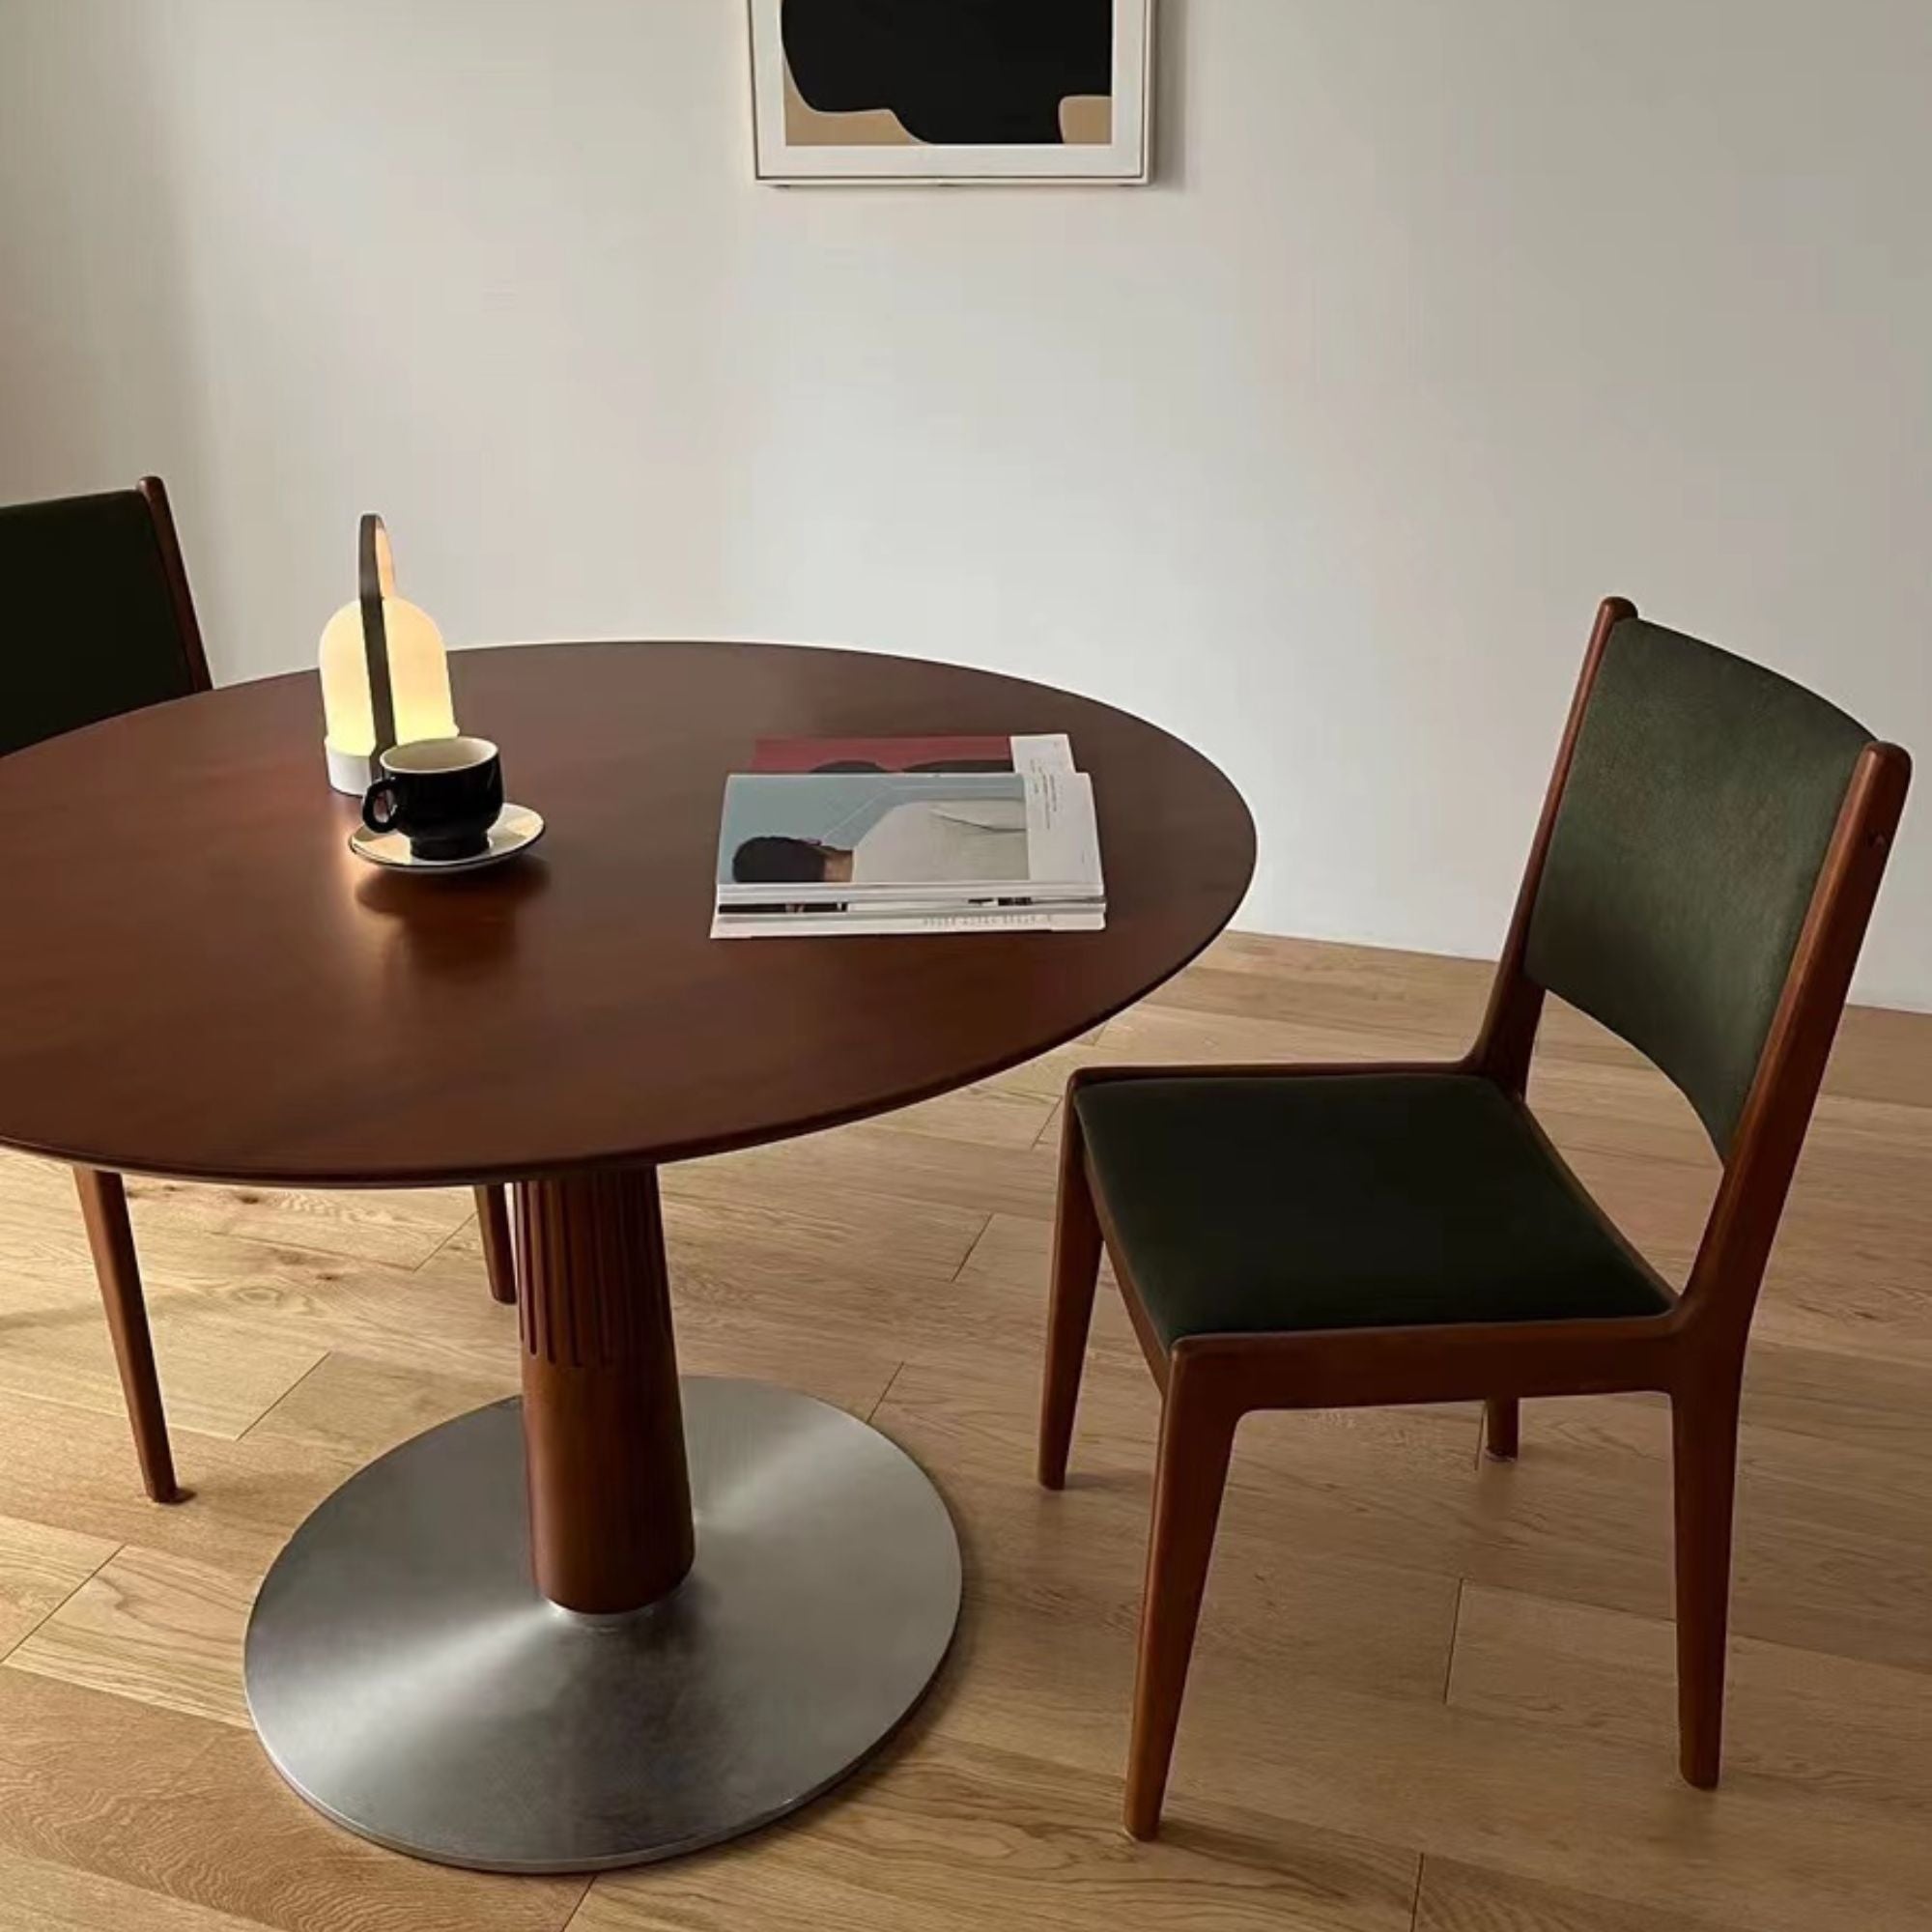 Troy poplar wood chair as part of round dining table set